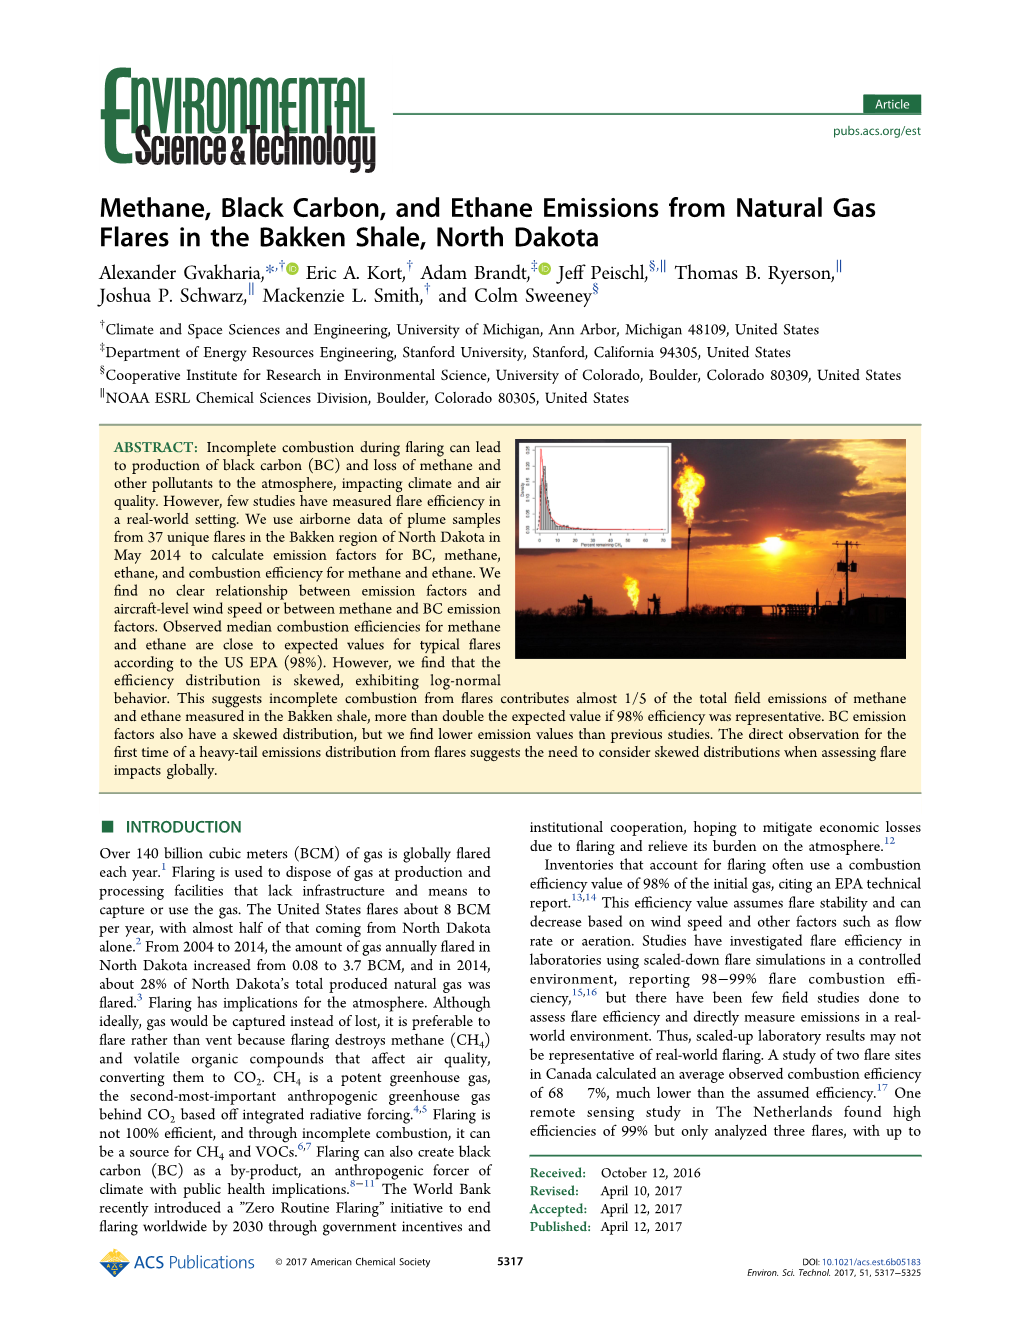 Methane, Black Carbon, and Ethane Emissions from Natural Gas Flares in the Bakken Shale, North Dakota Alexander Gvakharia,*,† Eric A